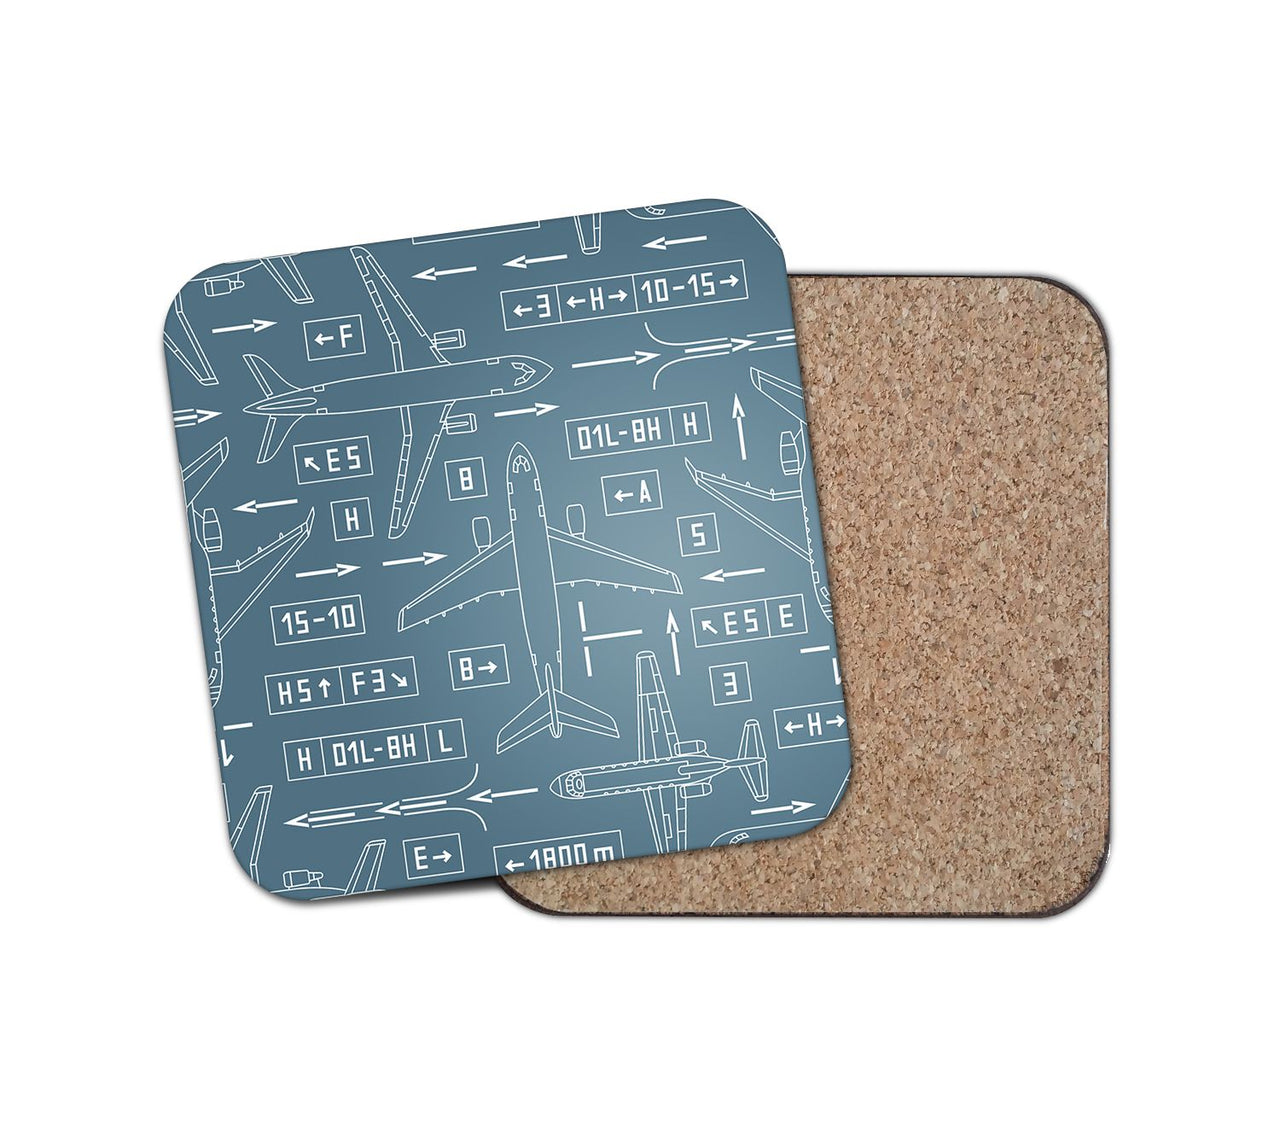 Jet Planes & Airport Signs Designed Coasters